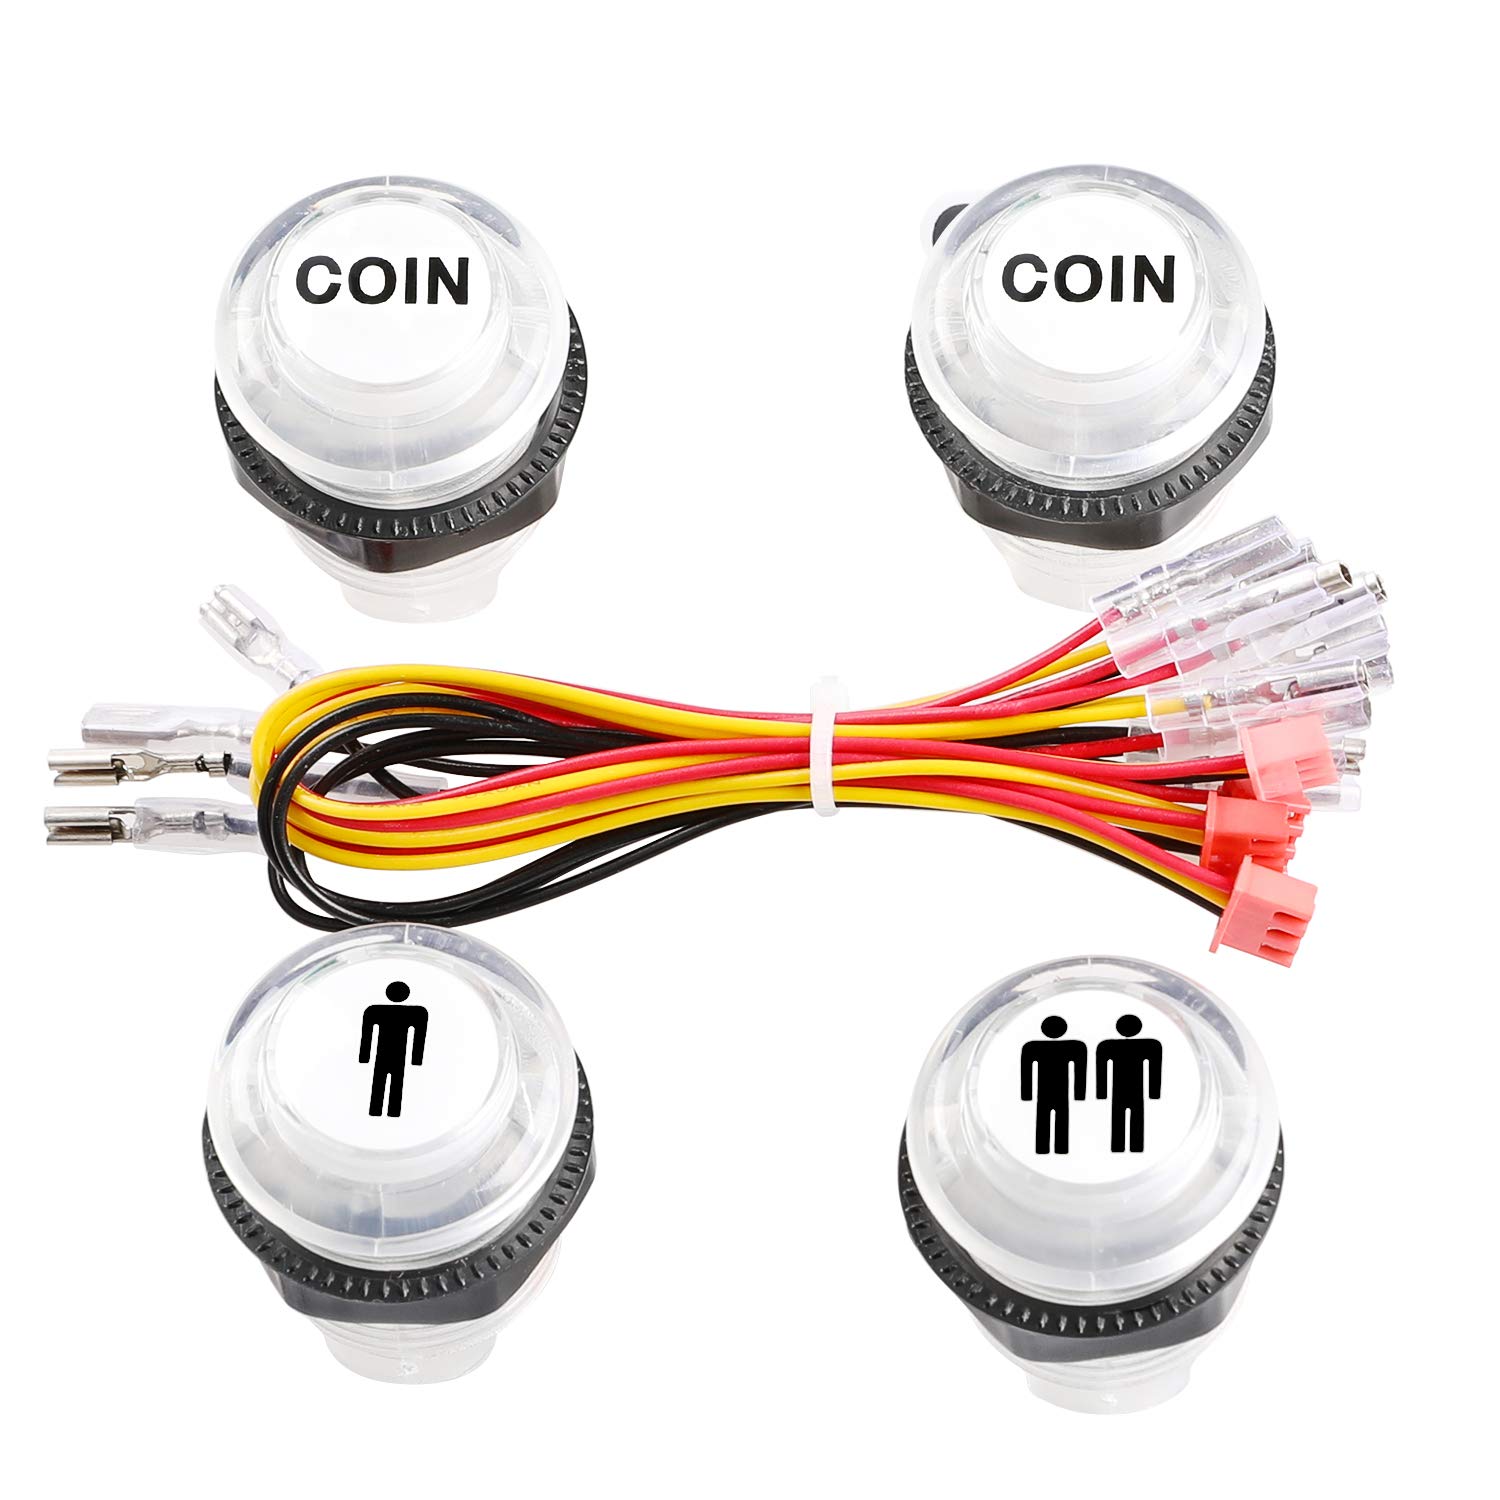 Easyget 4 Pcs/Lot 5V LED Illuminated Push Button 1P / 2P Player Start Buttons / 2X Coin Buttons for MAME / Jamma / Fighting Games / Arcade Video Games